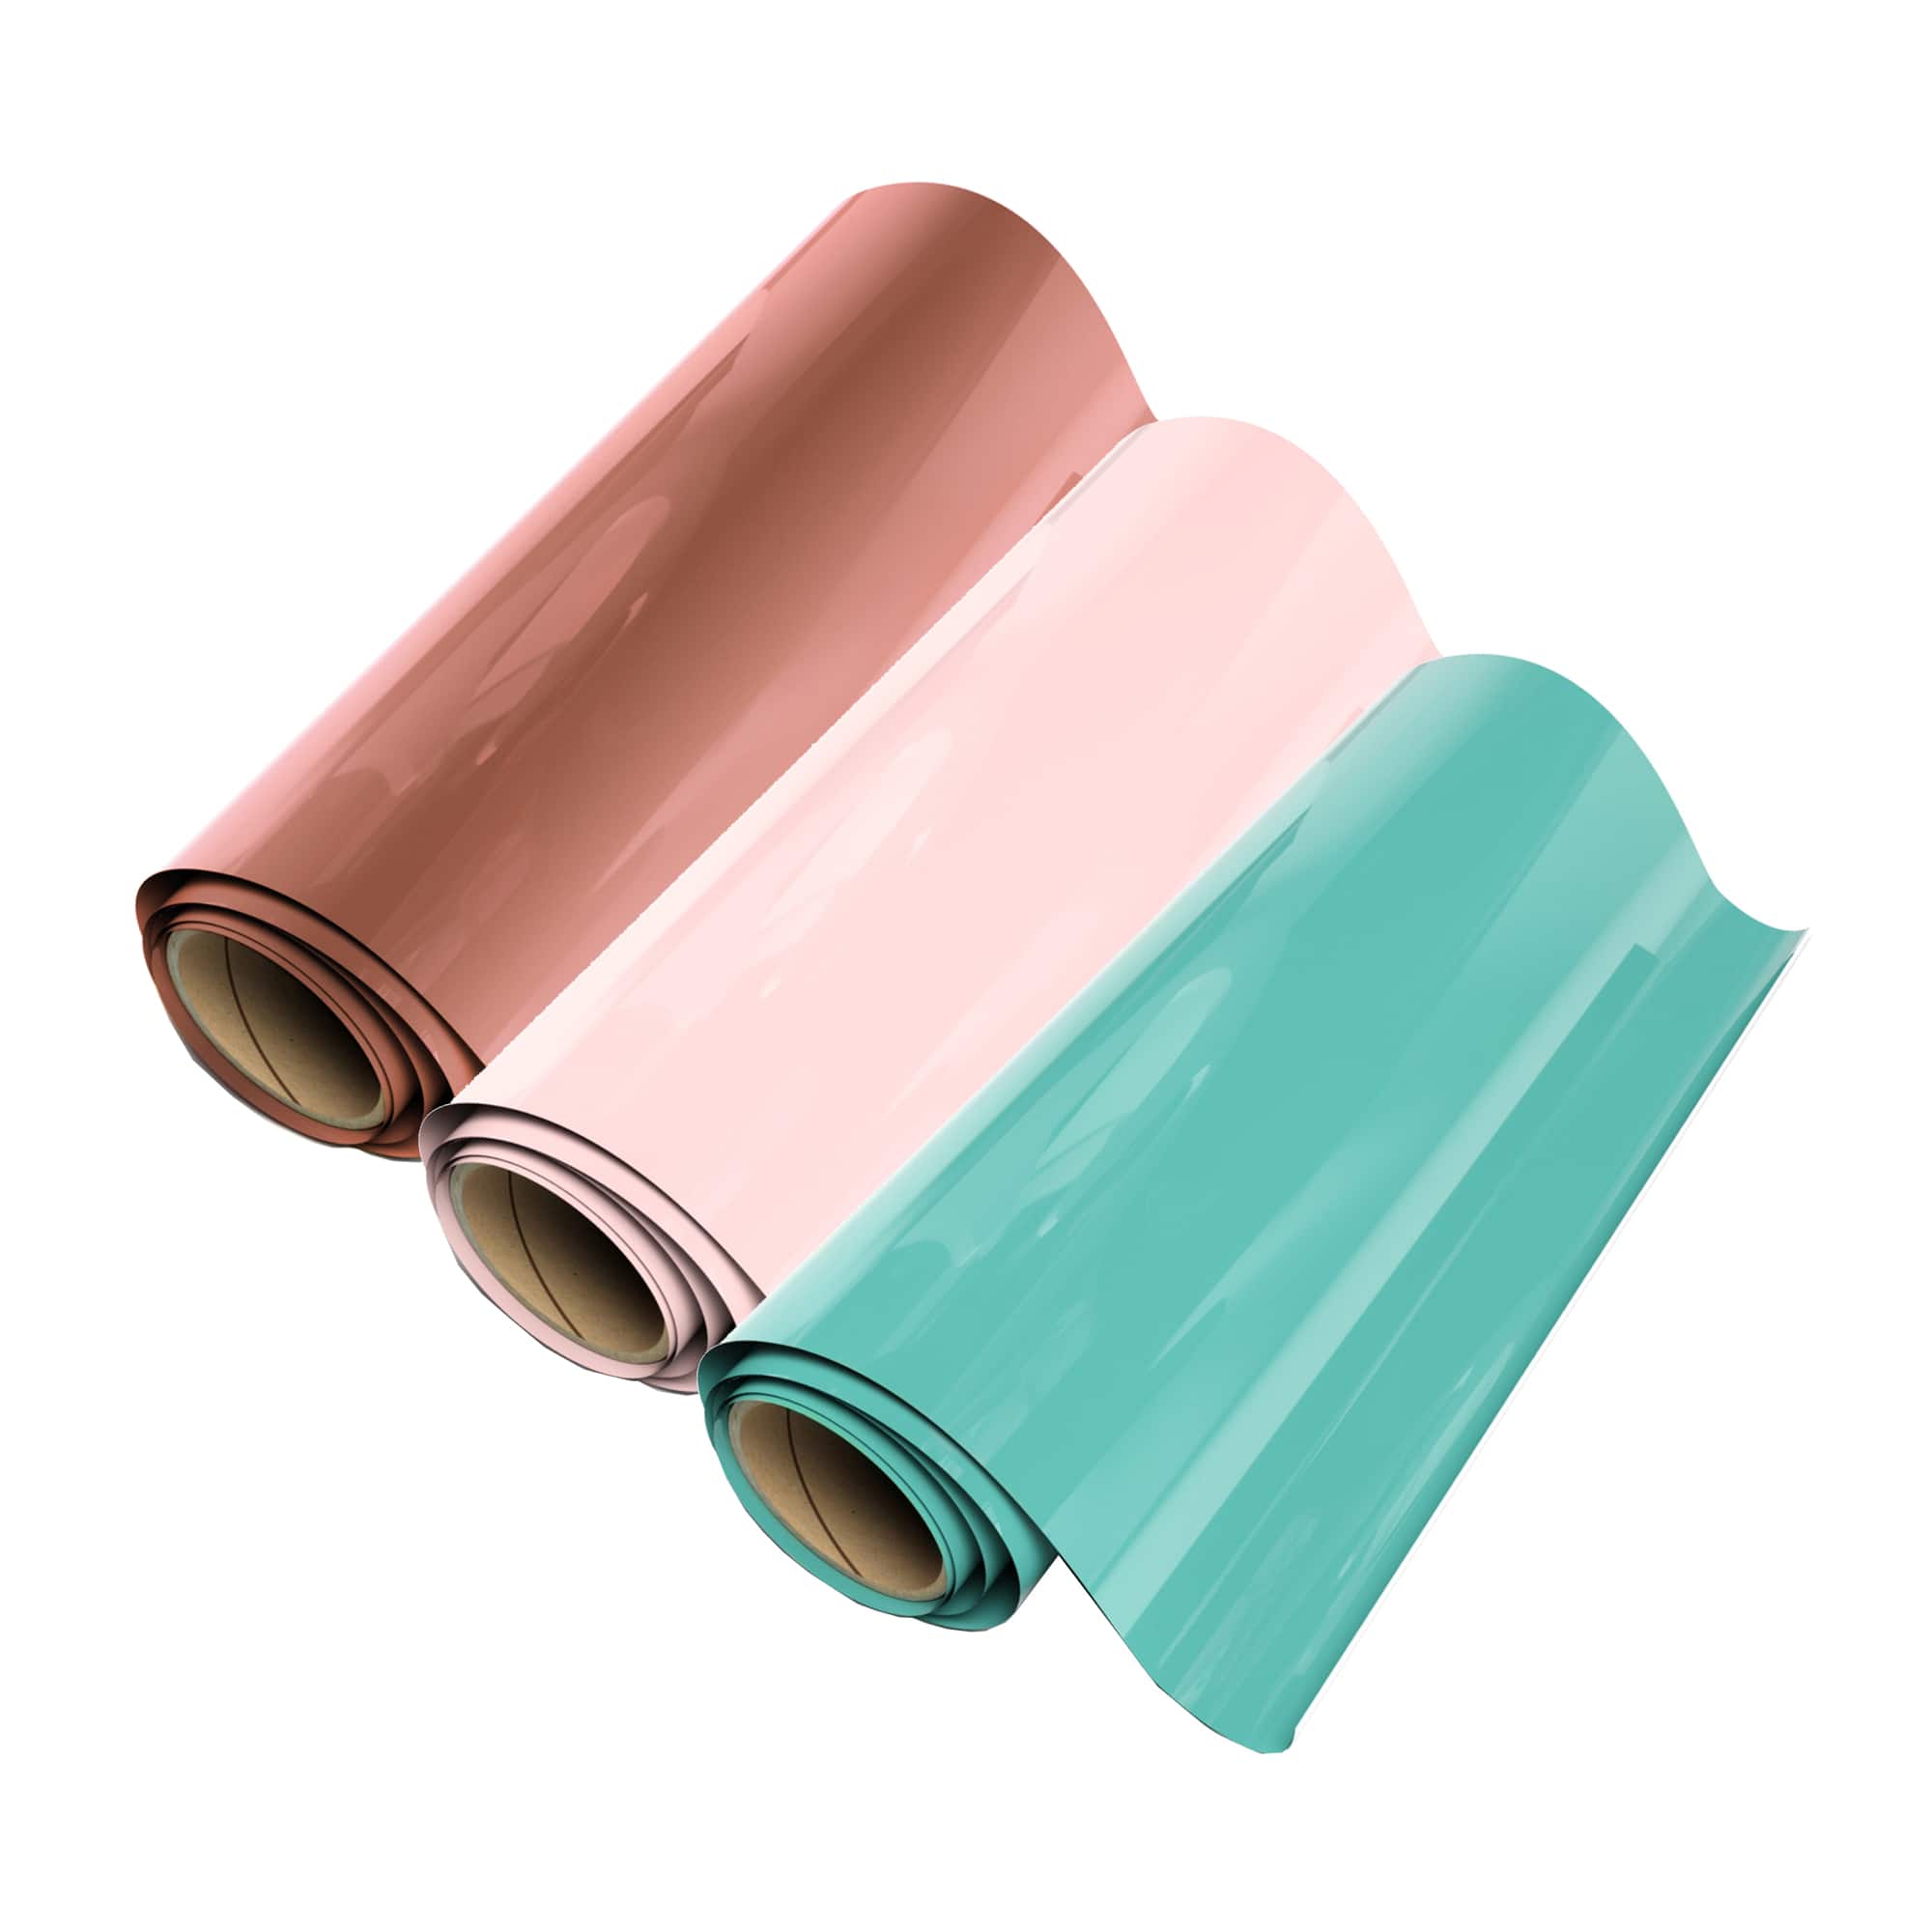 Passion Pink Siser Easyweed Stretch 15 x 3 Iron on Heat Transfer Vinyl Roll Coaches World